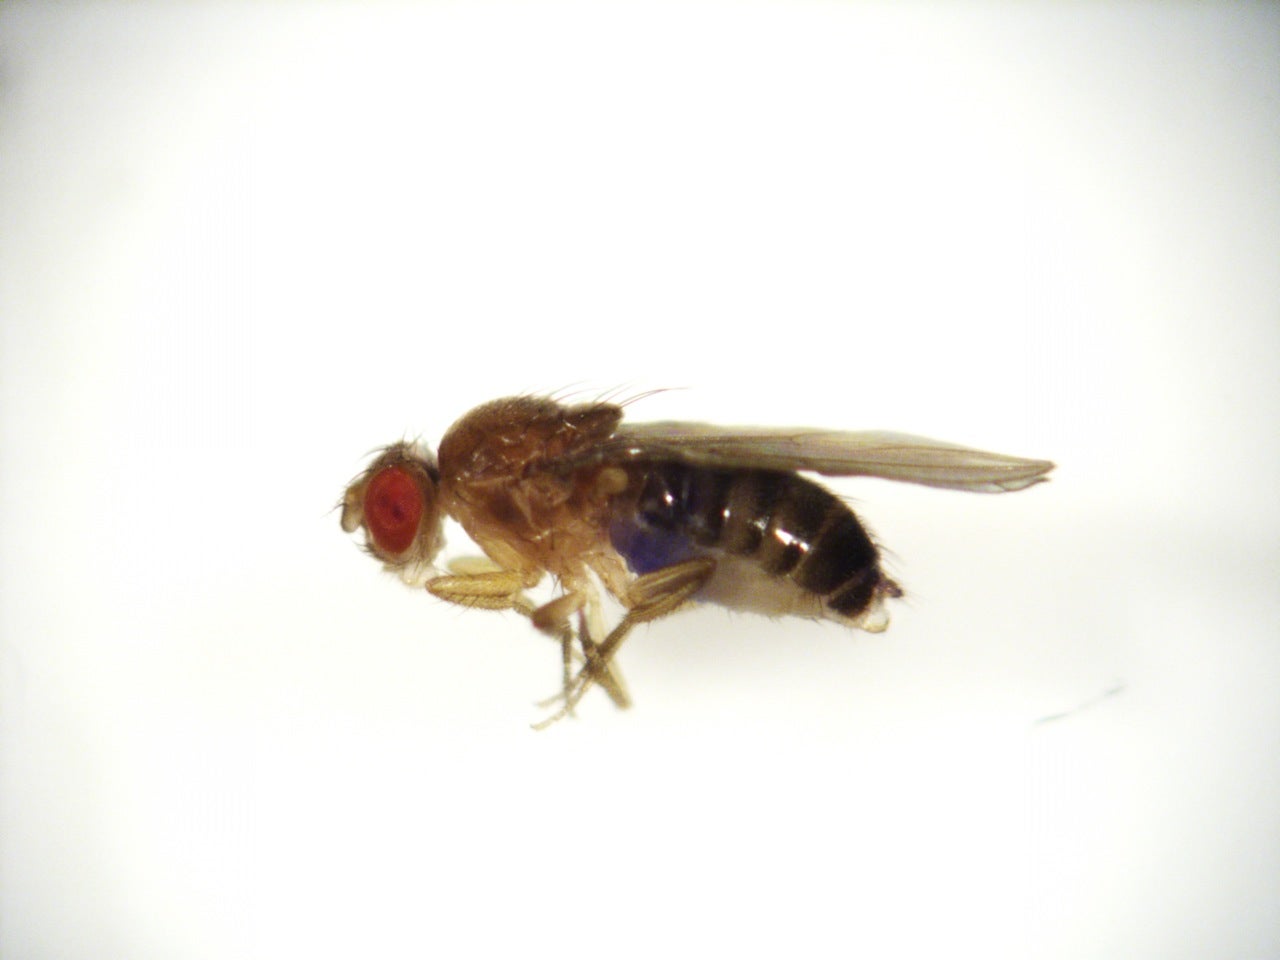  Blue dye visible in the abdomen of this fruit fly show it ate erythritol, a component of the sugar substitute Truvia. (Photo courtesy of Kaitlin Baudier) 